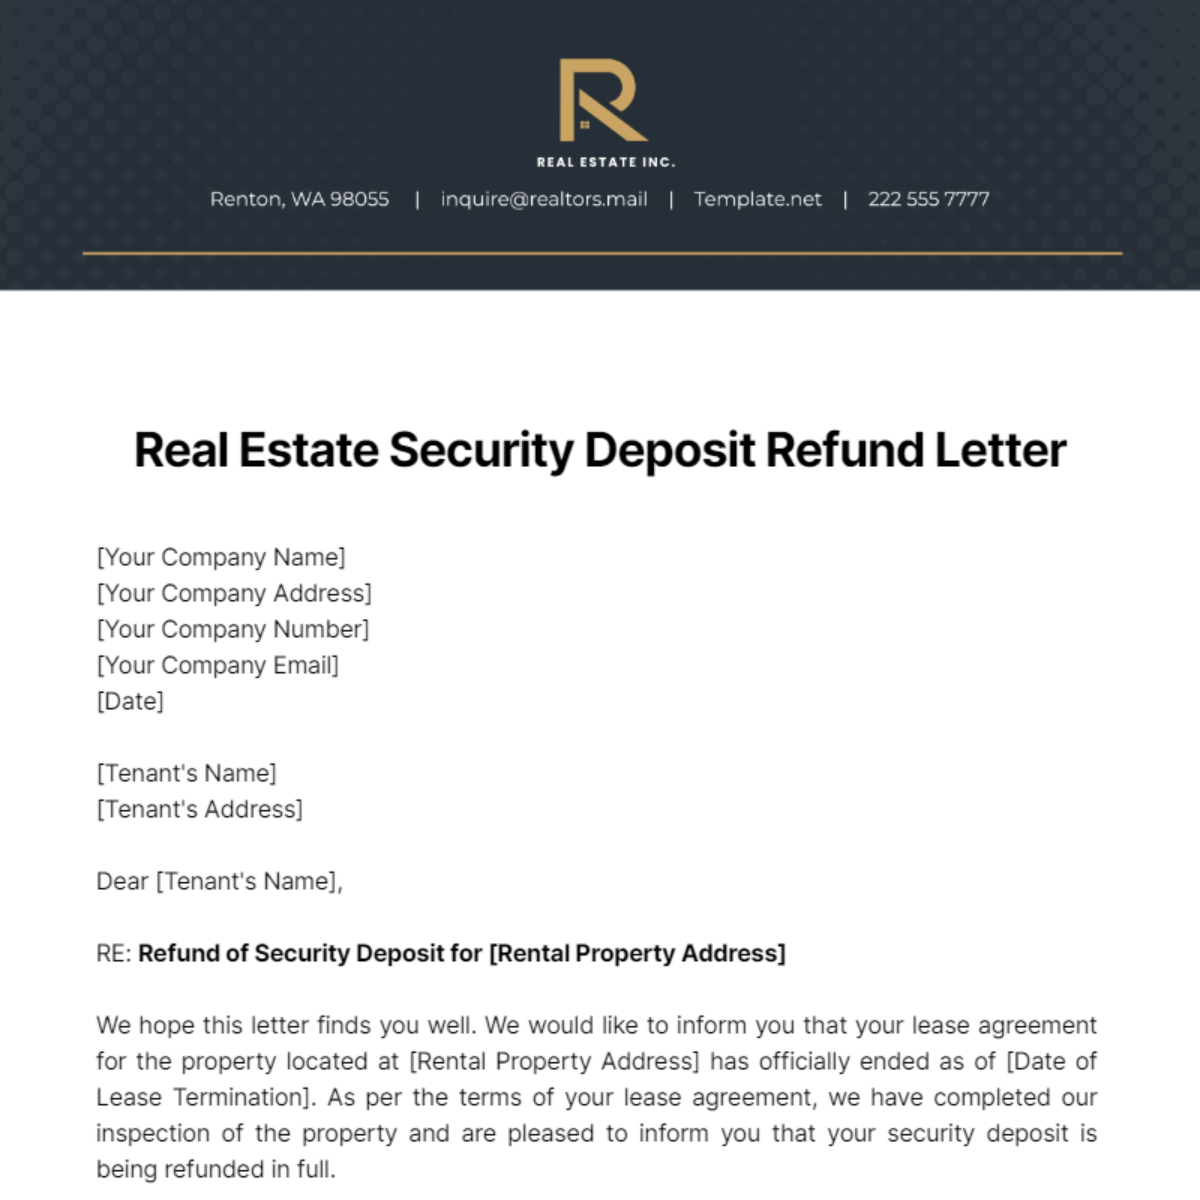 Real Estate Security Deposit Refund Letter Template